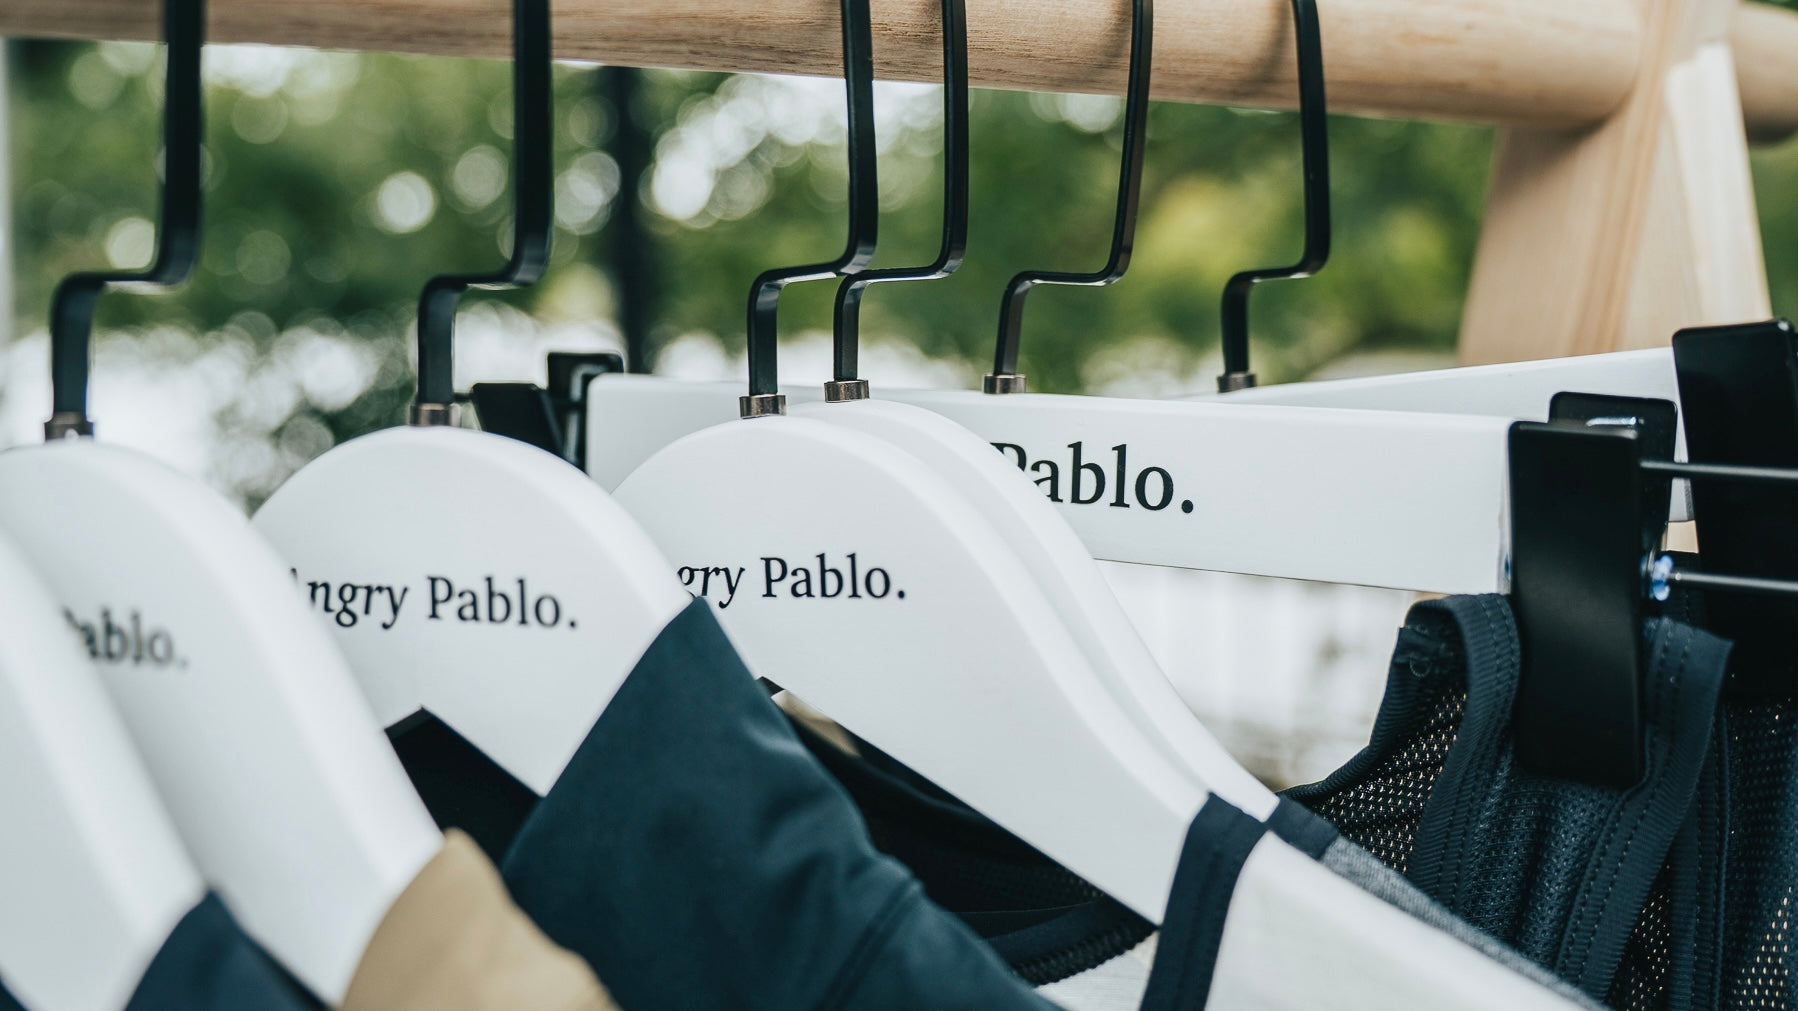 Angry Pablo cycling products hanging on clothes hangers